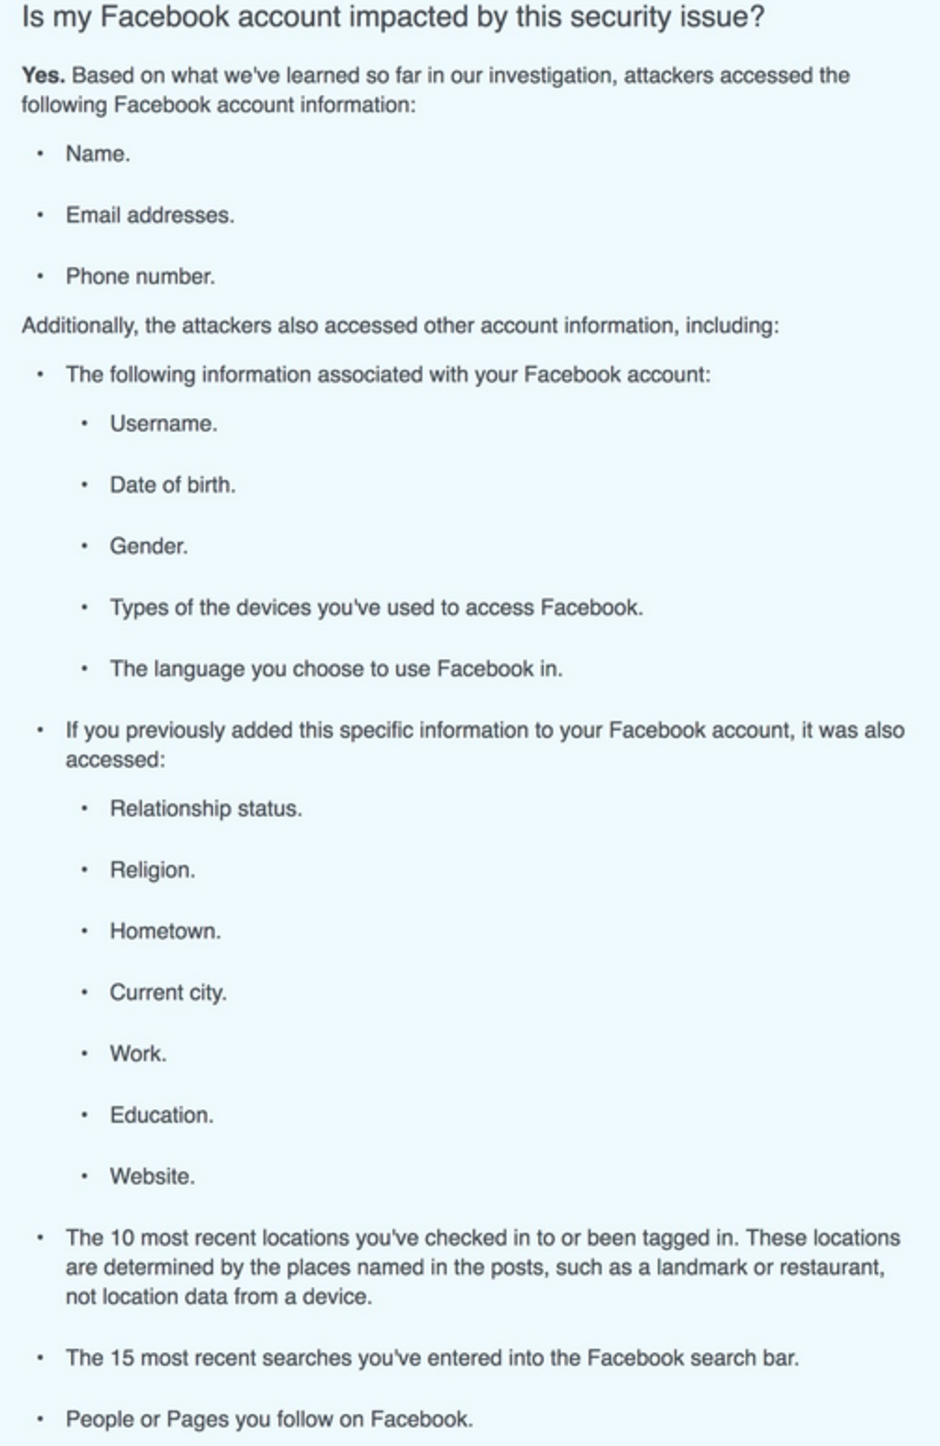 If your personal information was compromised on Facebook, you will see the above note in the Facebook help center - 30 million Facebook users have personal data accessed by hackers